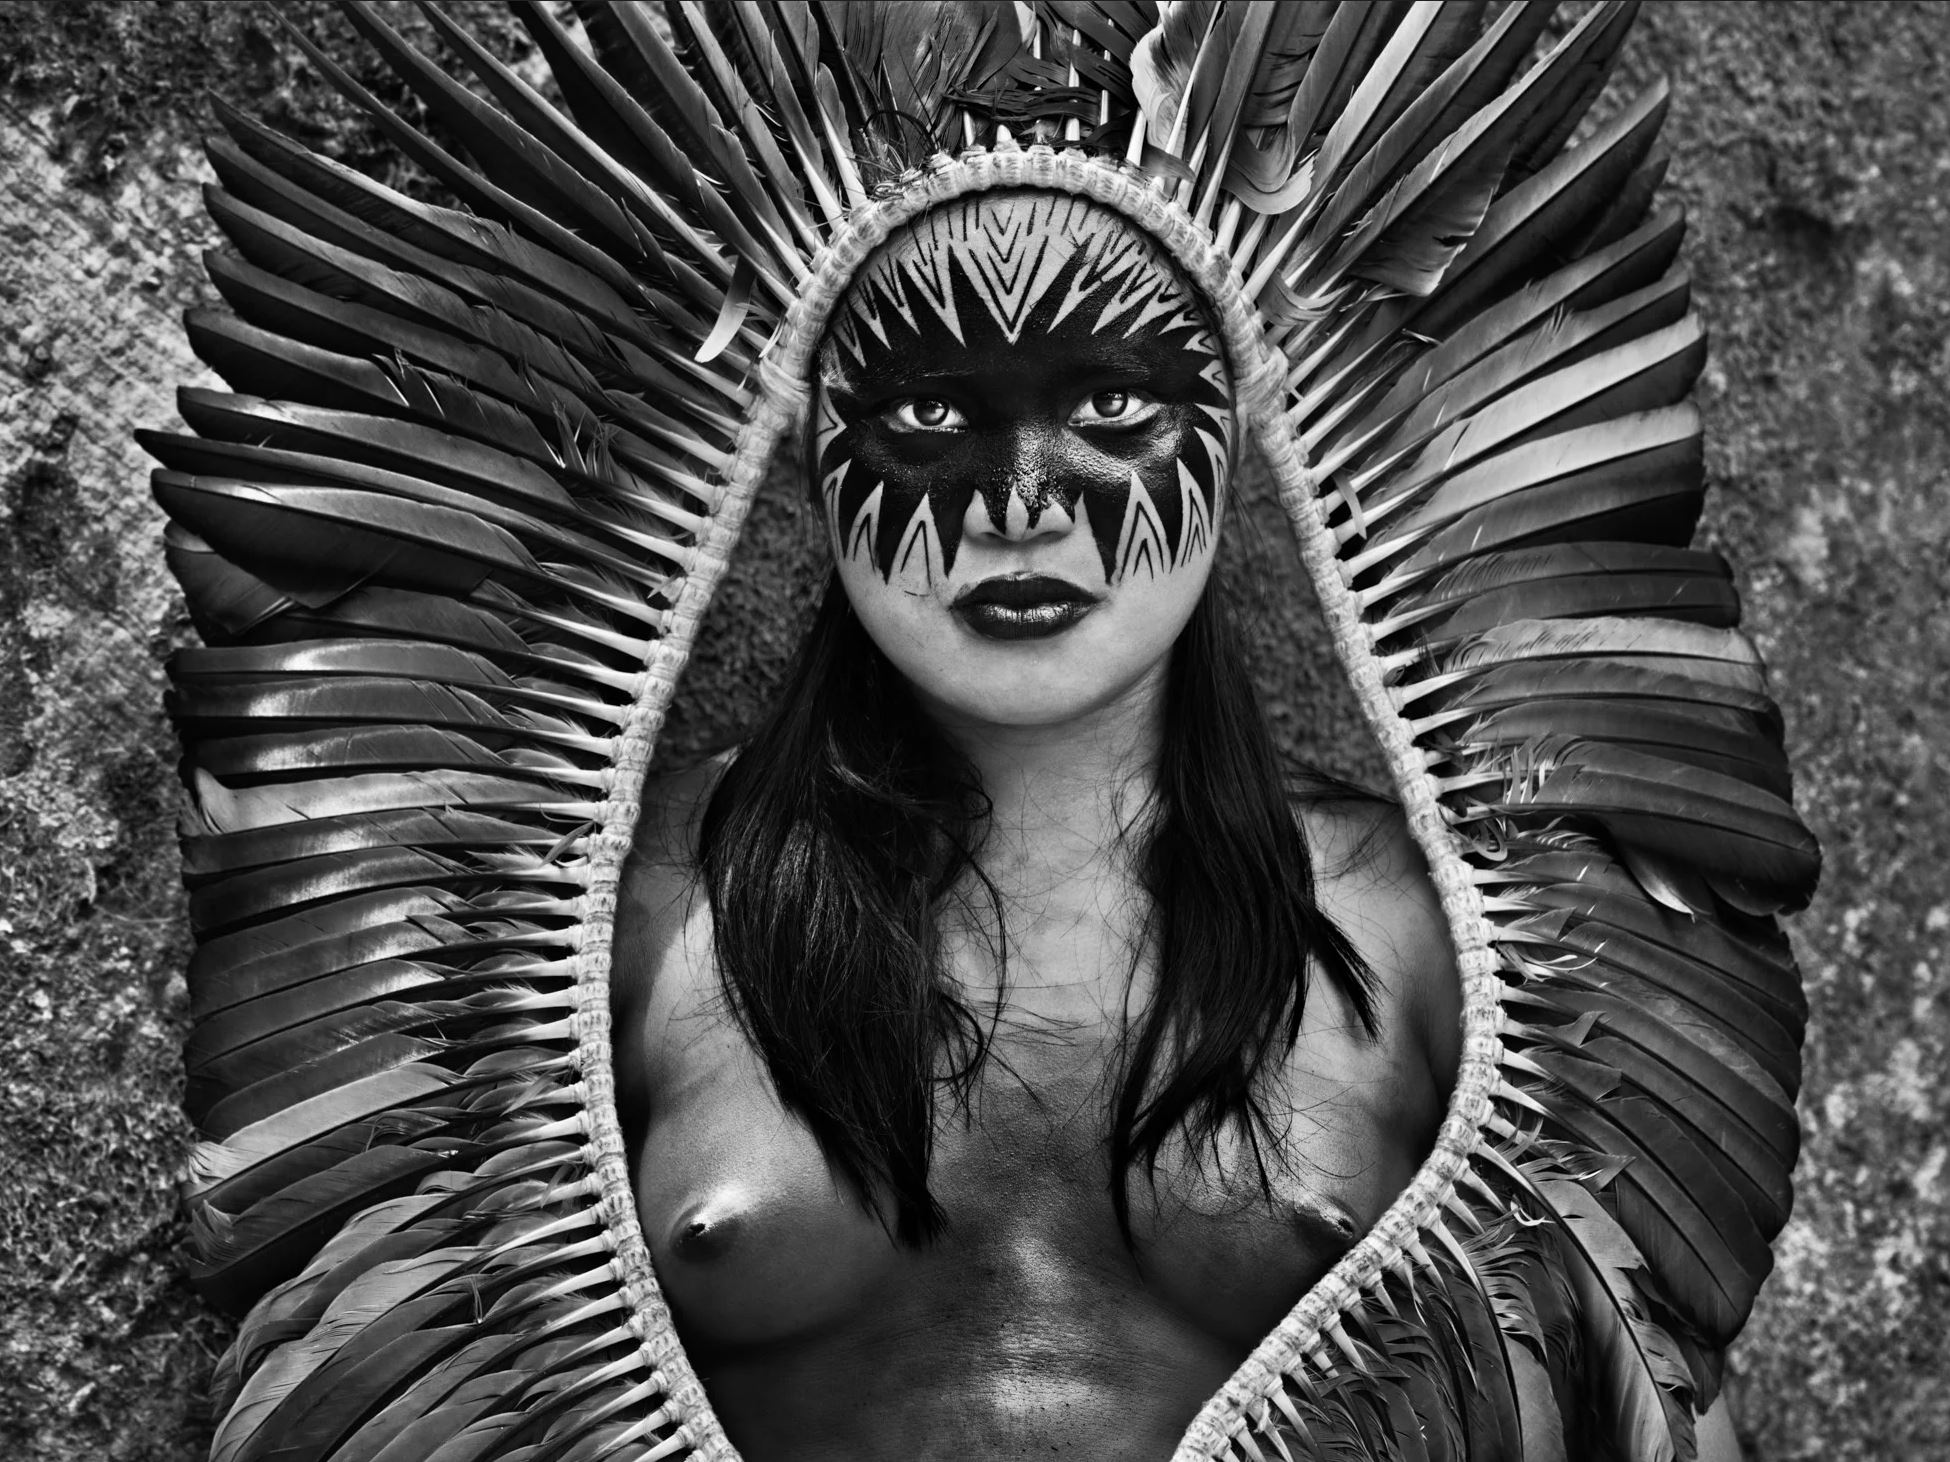 Amazonian indigenous woman with a traditional headdress